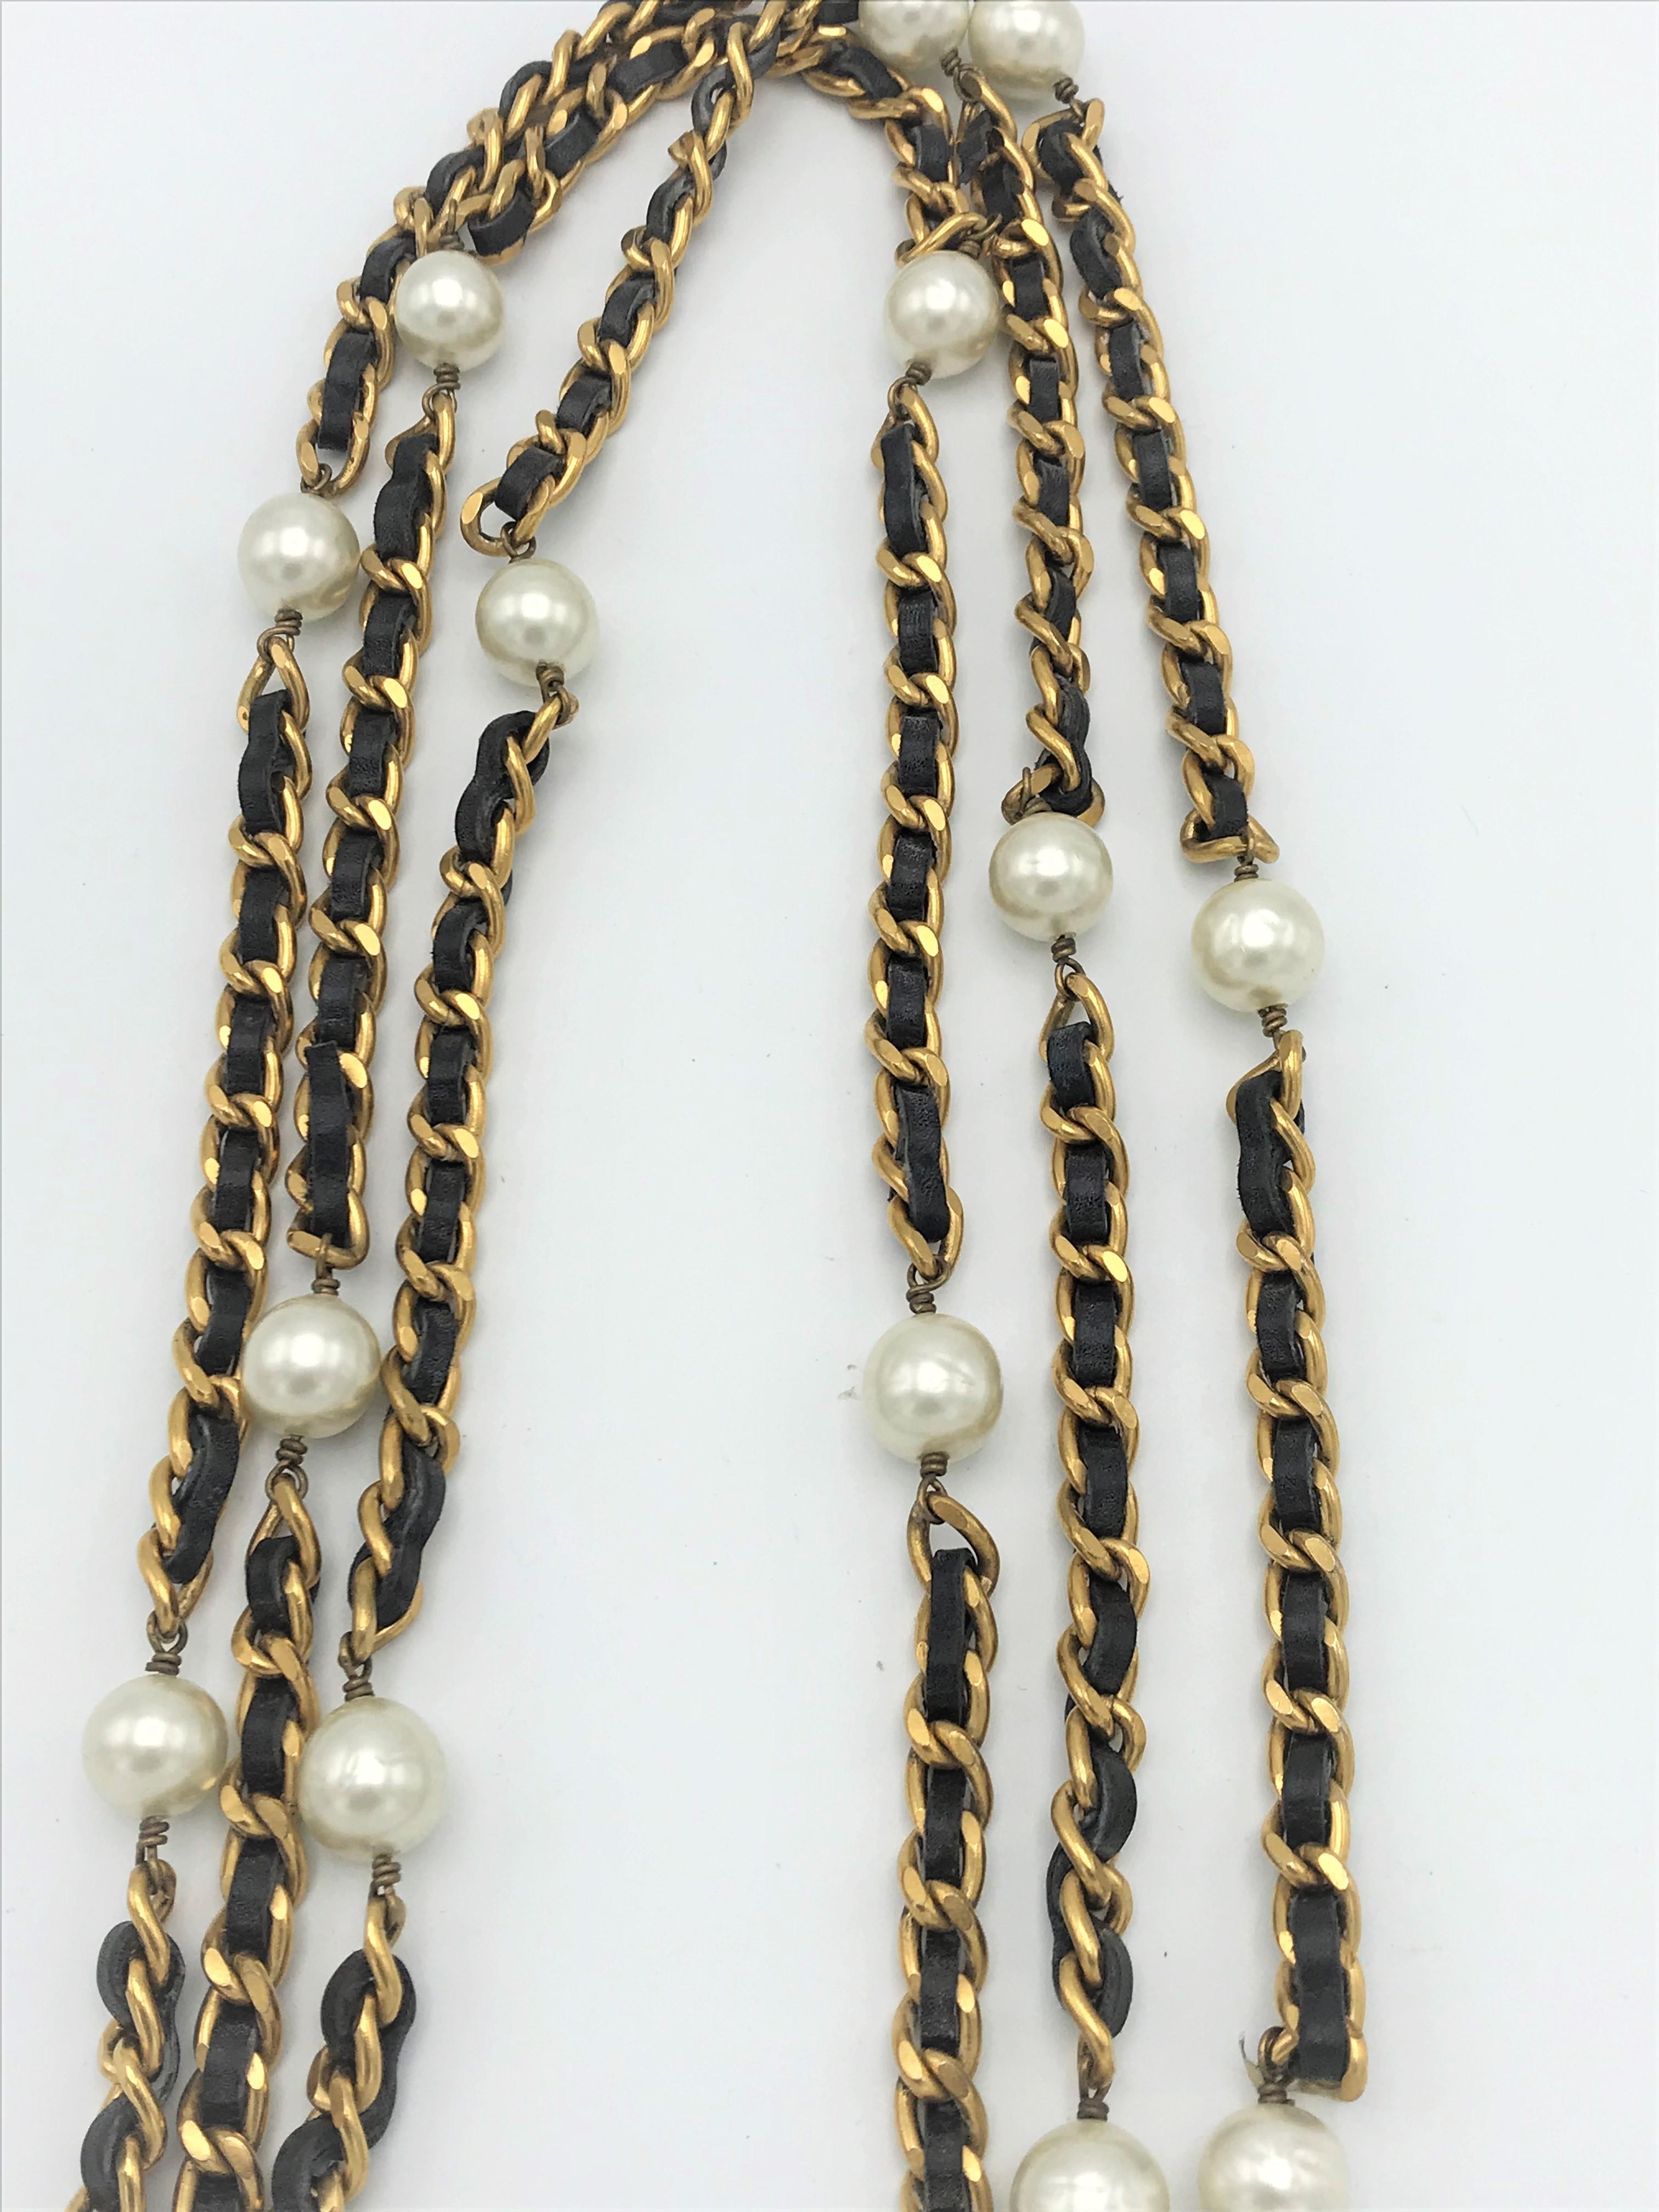 Round Cut Iconic Chanel chain with leather woven throughout and Chanel pearls, 1990s